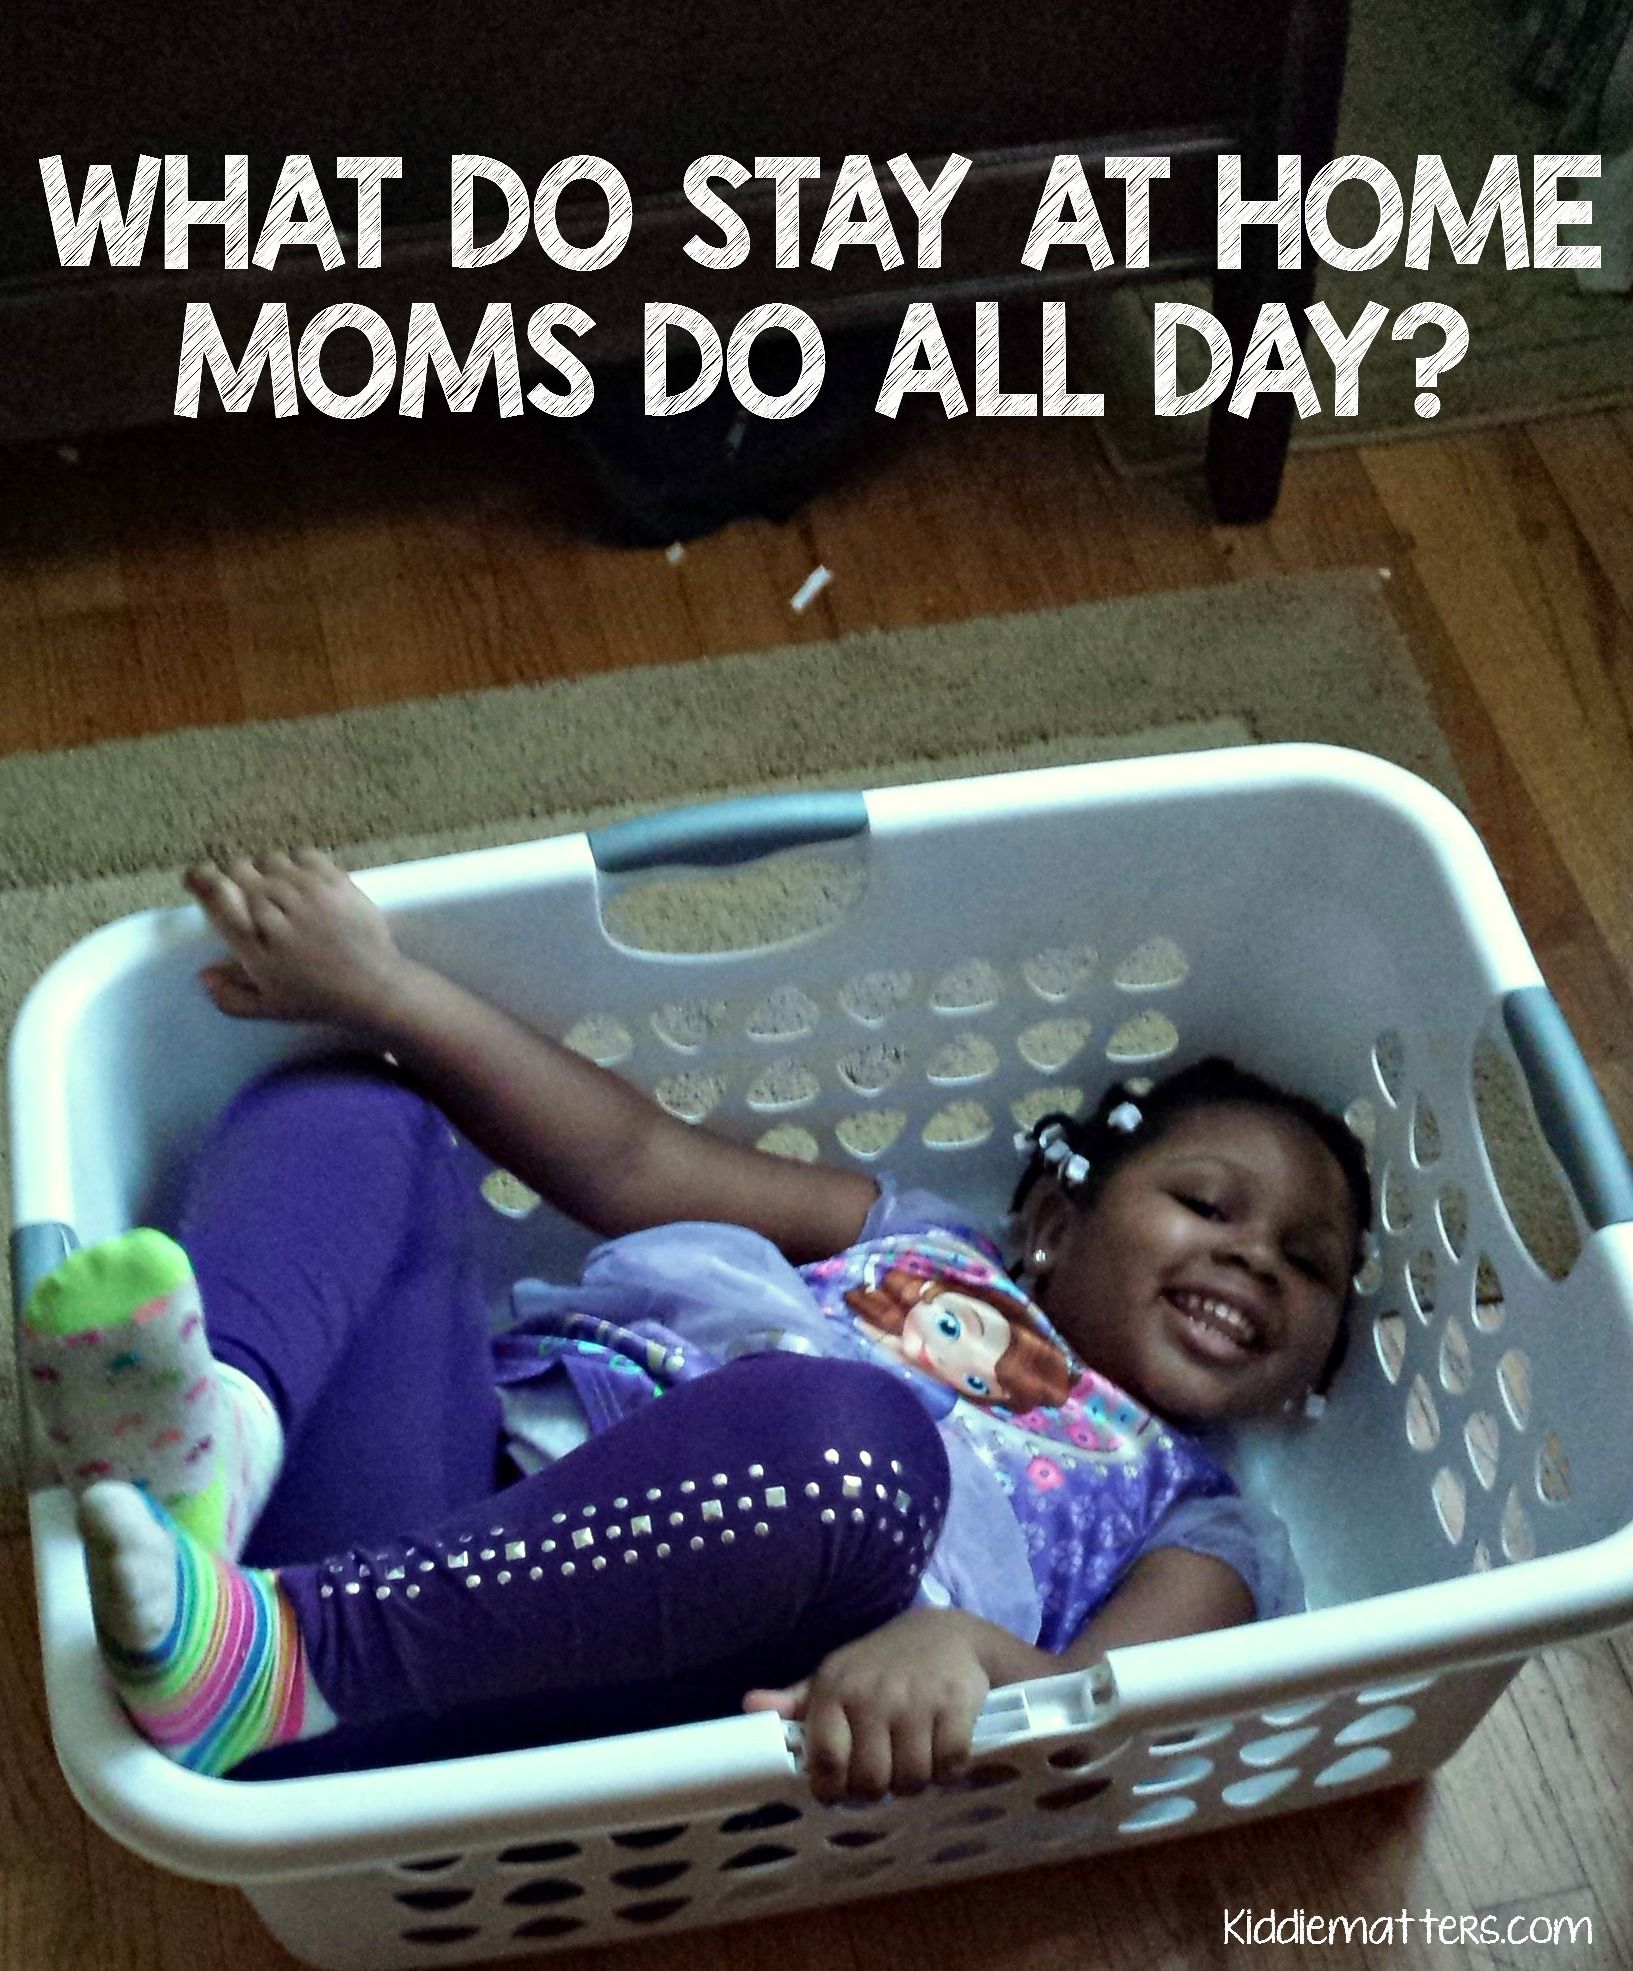 Ever wonder what a Stay At Home Mom does all day?